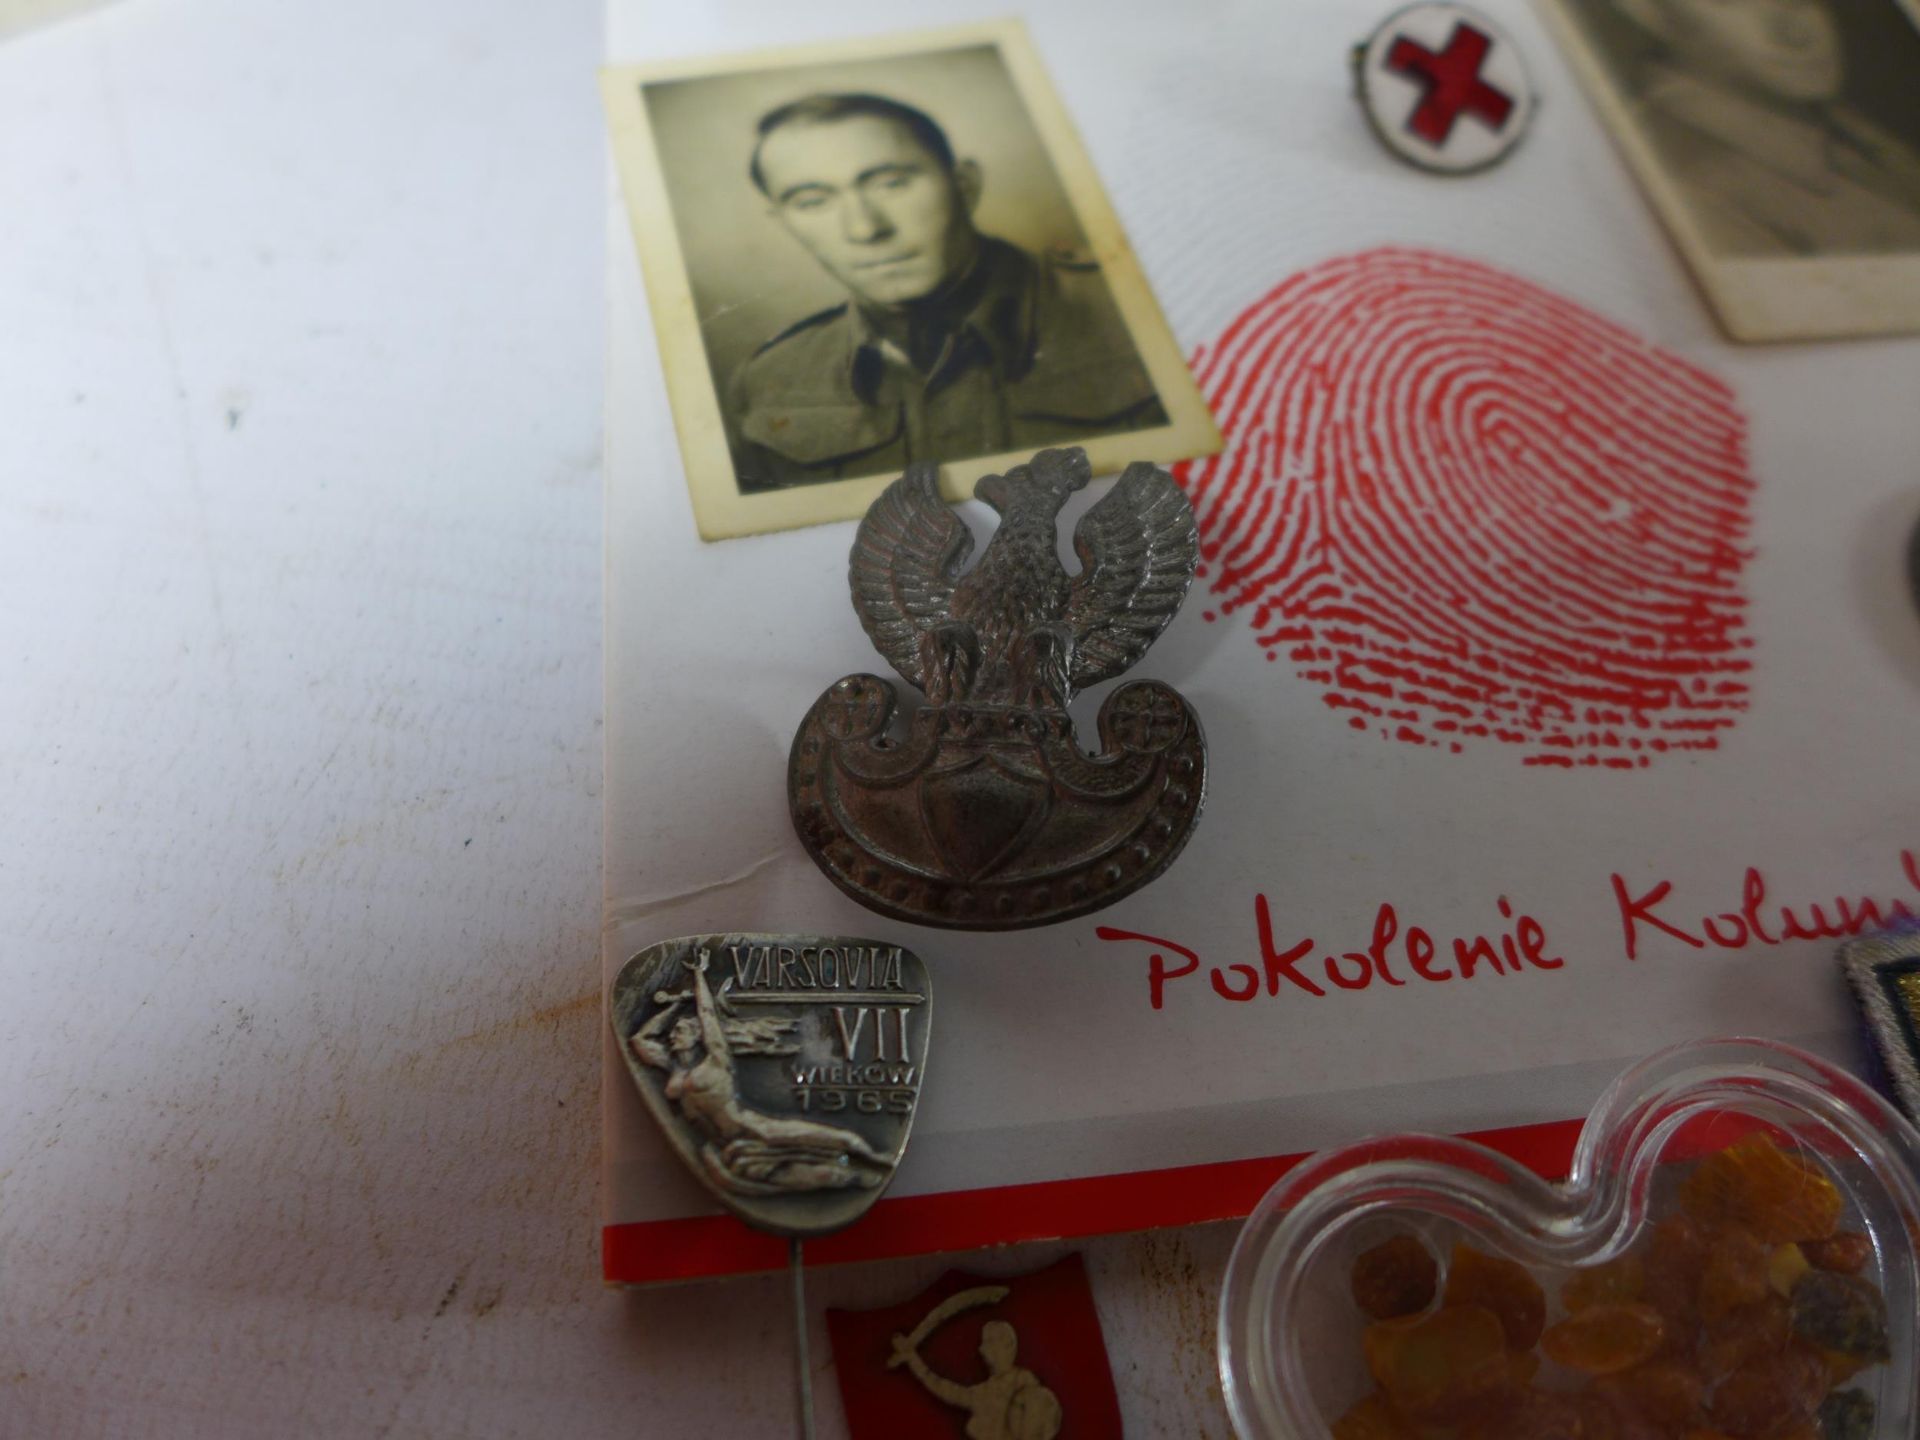 A LARGE COLLECTION OF POLISH WORLD WAR II AND LATER EPHEMERA, TO INCLUDE PHOTOS, BADGES, IDENTITY - Image 2 of 10